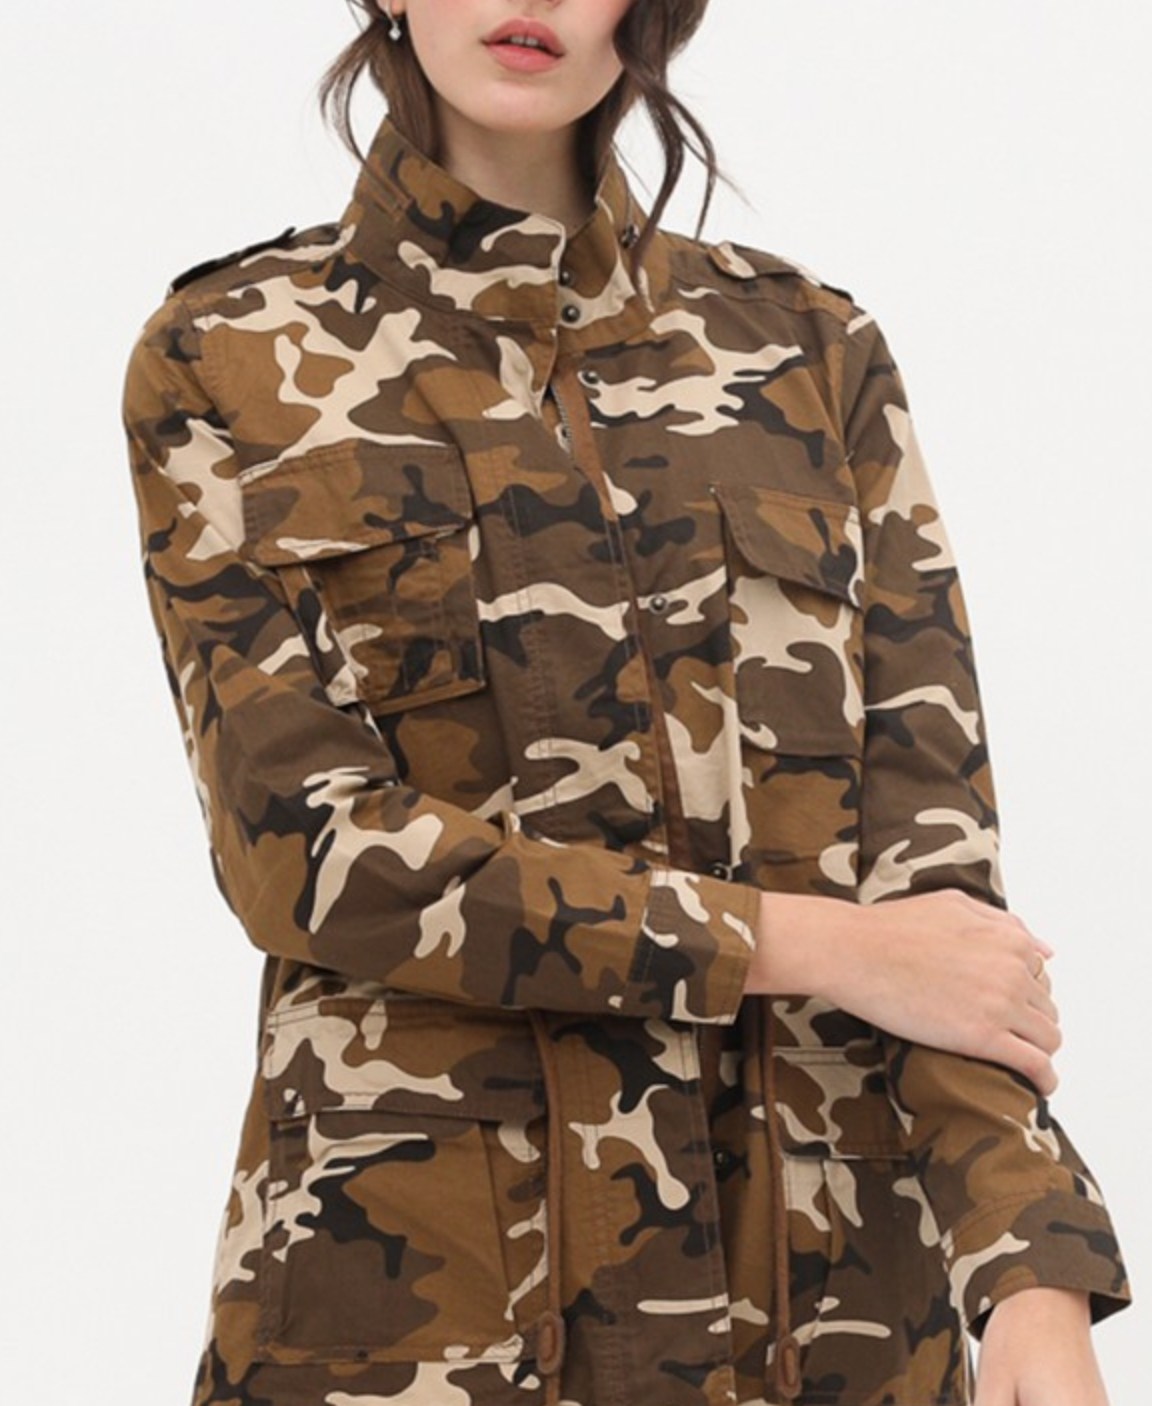 Camo Print Anorak Jacket - S.O.S Save Our Soles